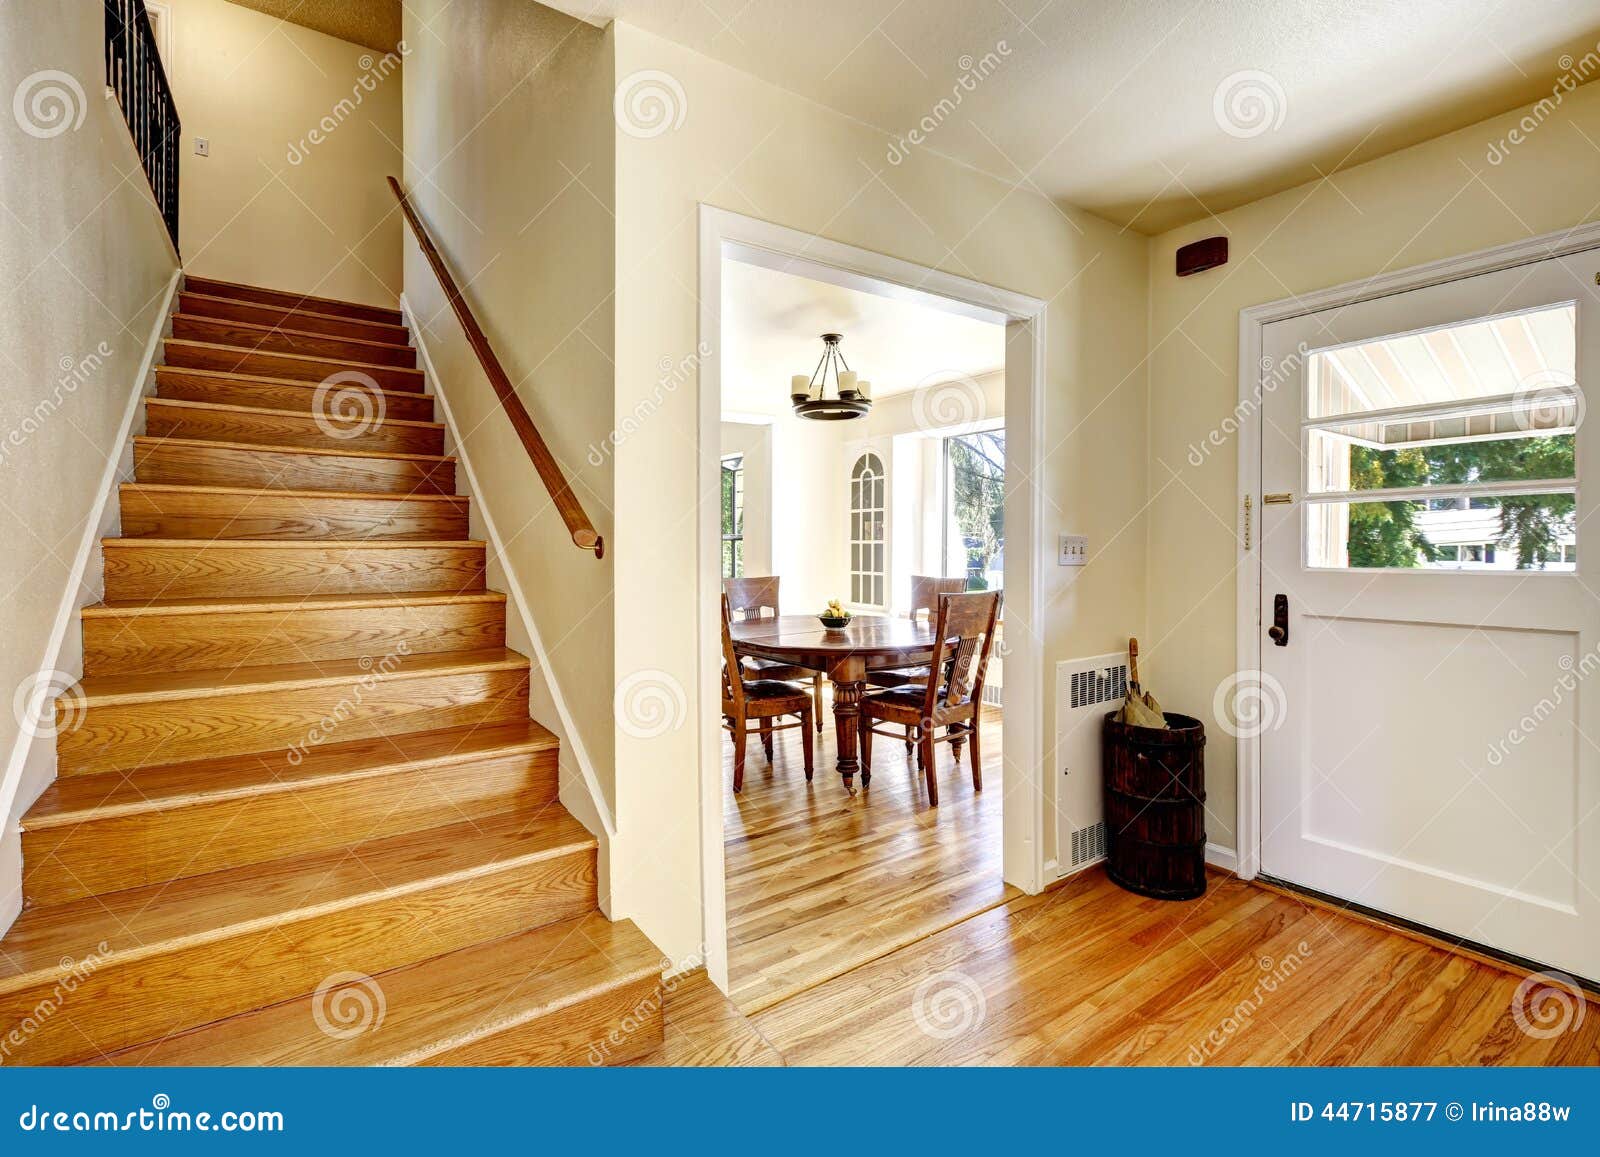 Entance empty hallway with hardwood floor and wooden staircase.